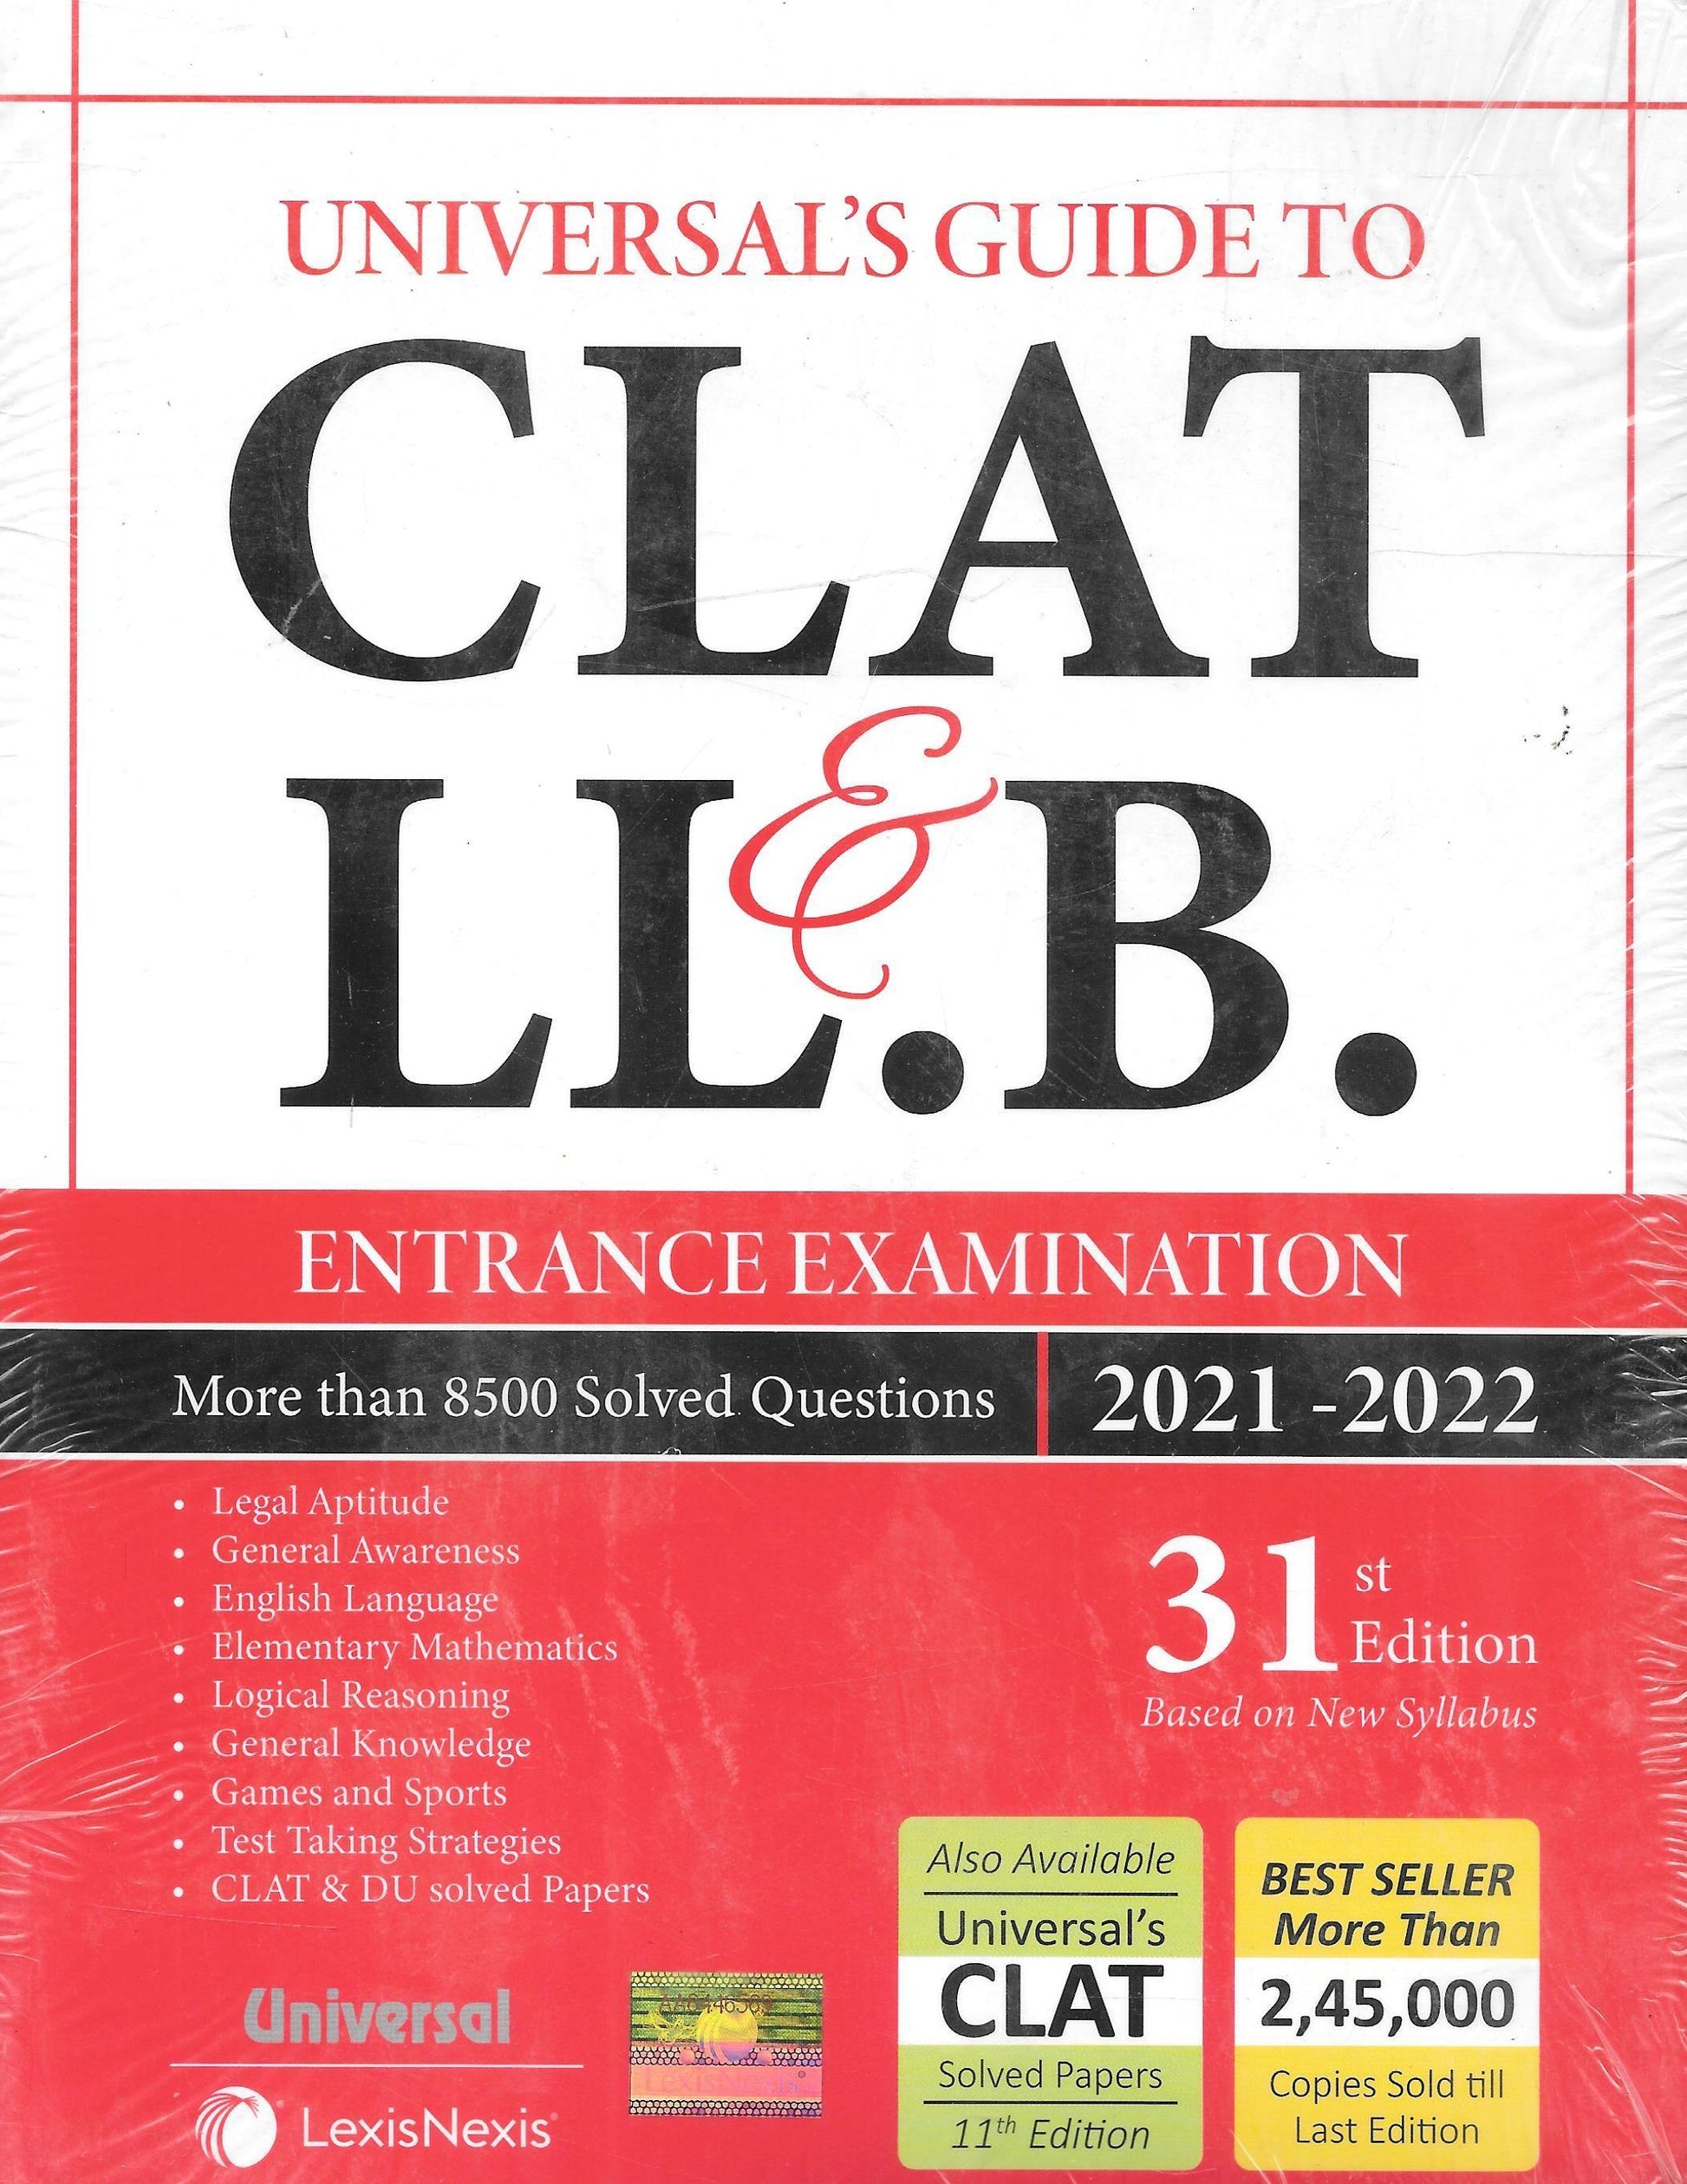 Guide to CLAT & LL.B. Entrance Examination 2021-22 - M&J Services